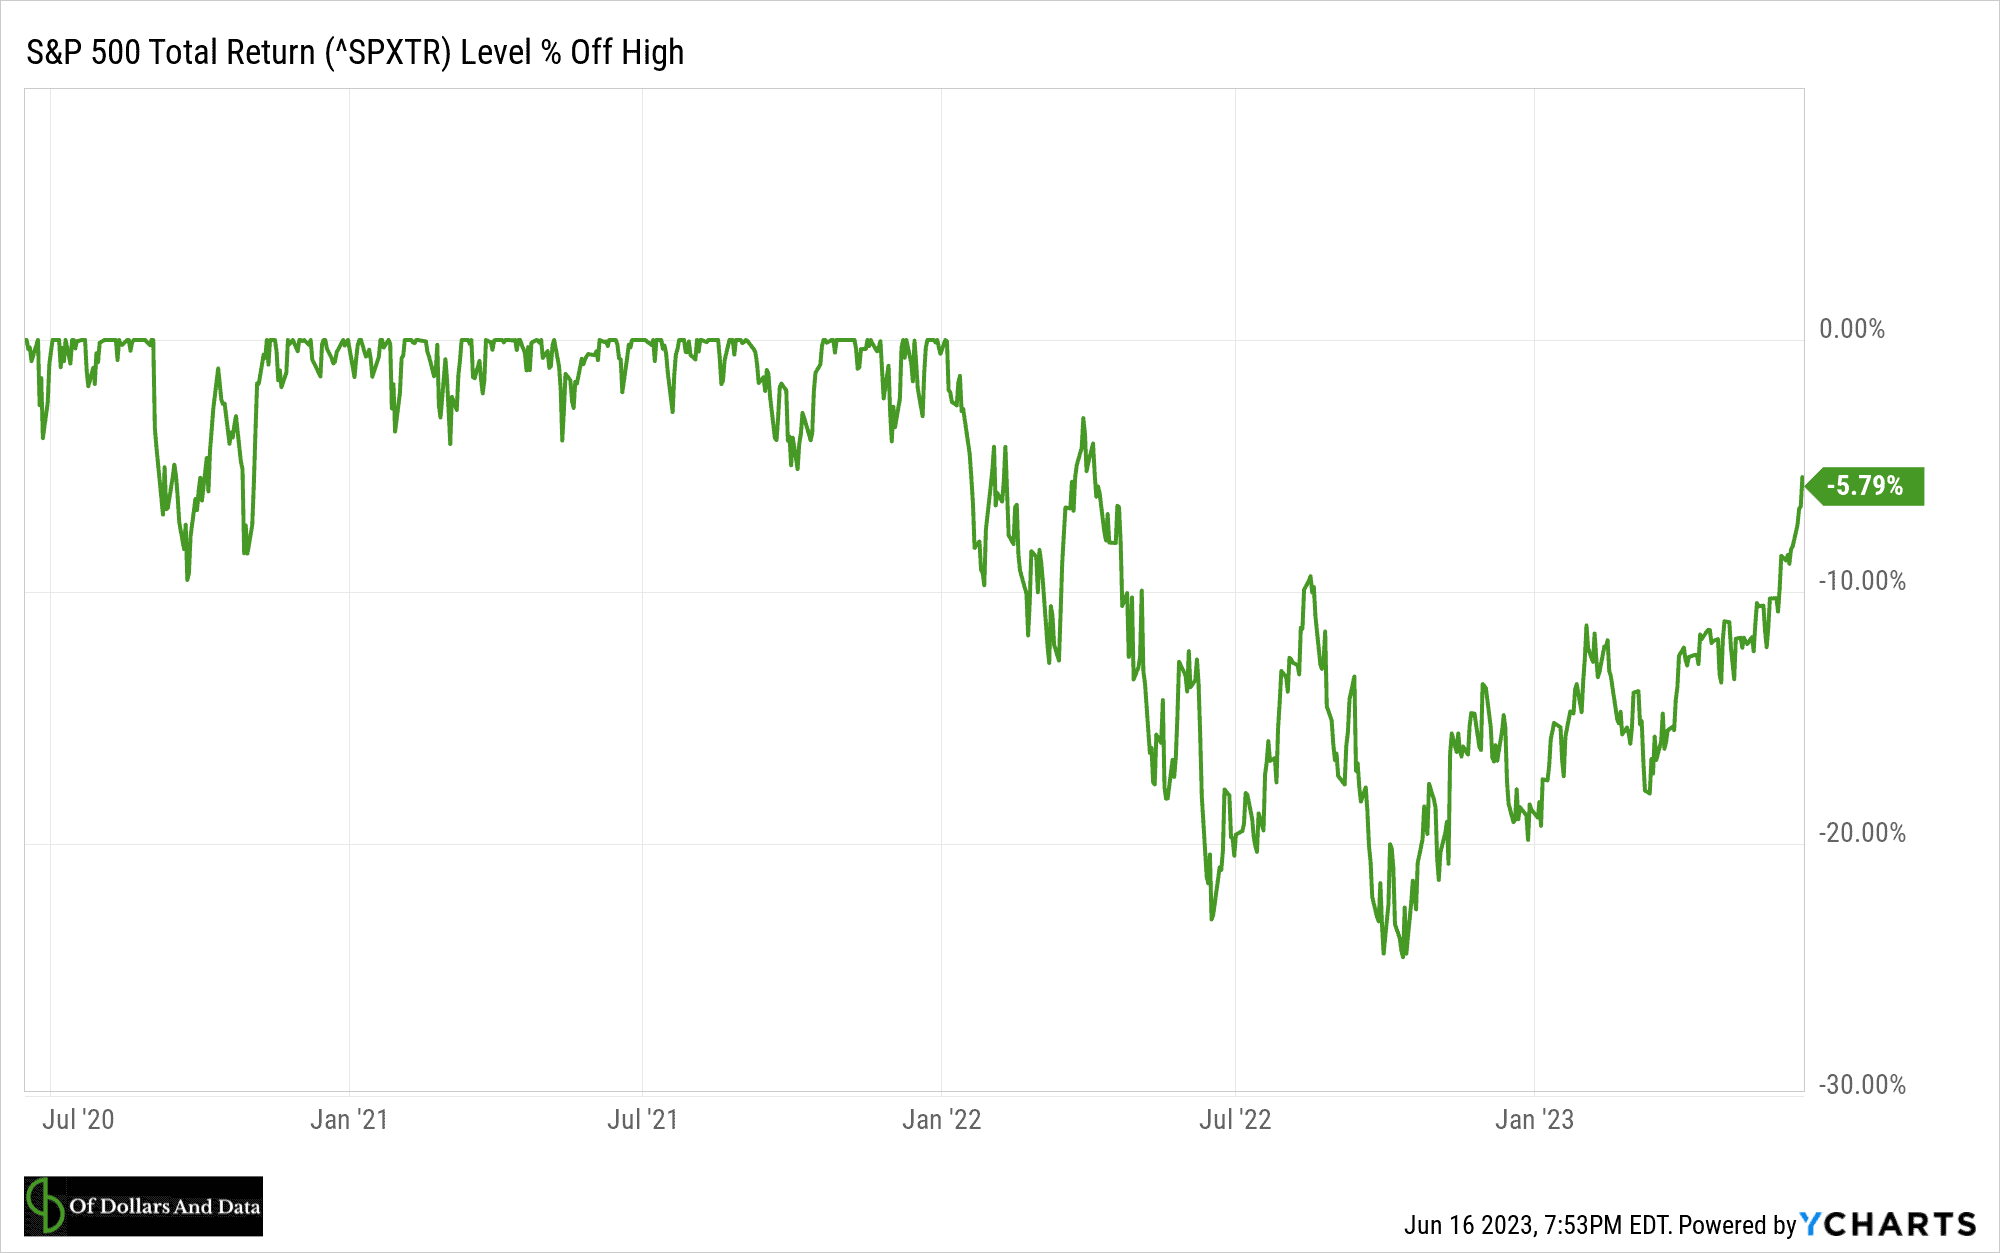 Chart showing the S&P 500 percentage away from all-time highs from June 2020 to June 2023.